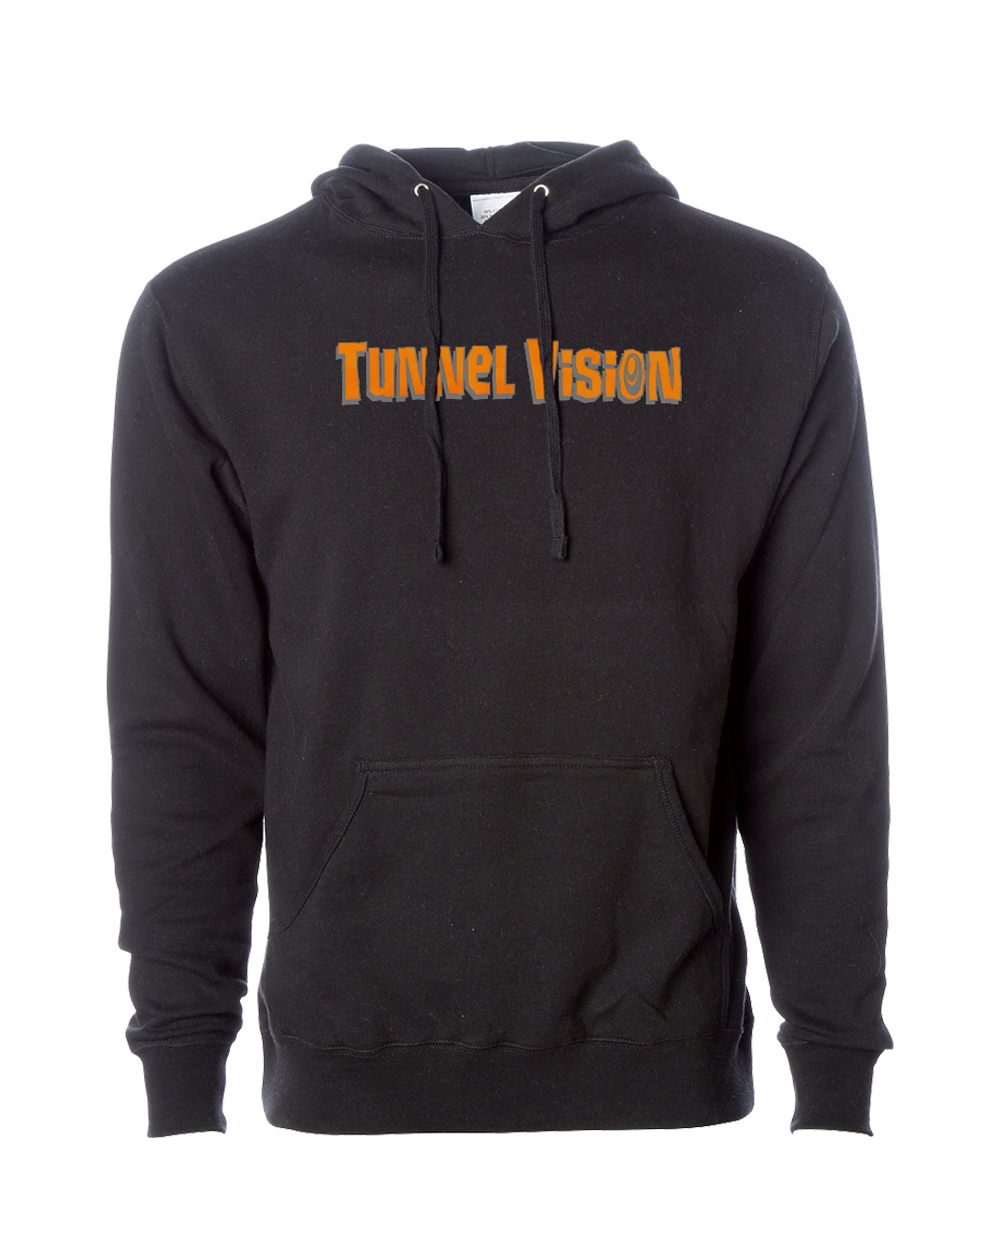 Apparel – Tunnel Vision Store